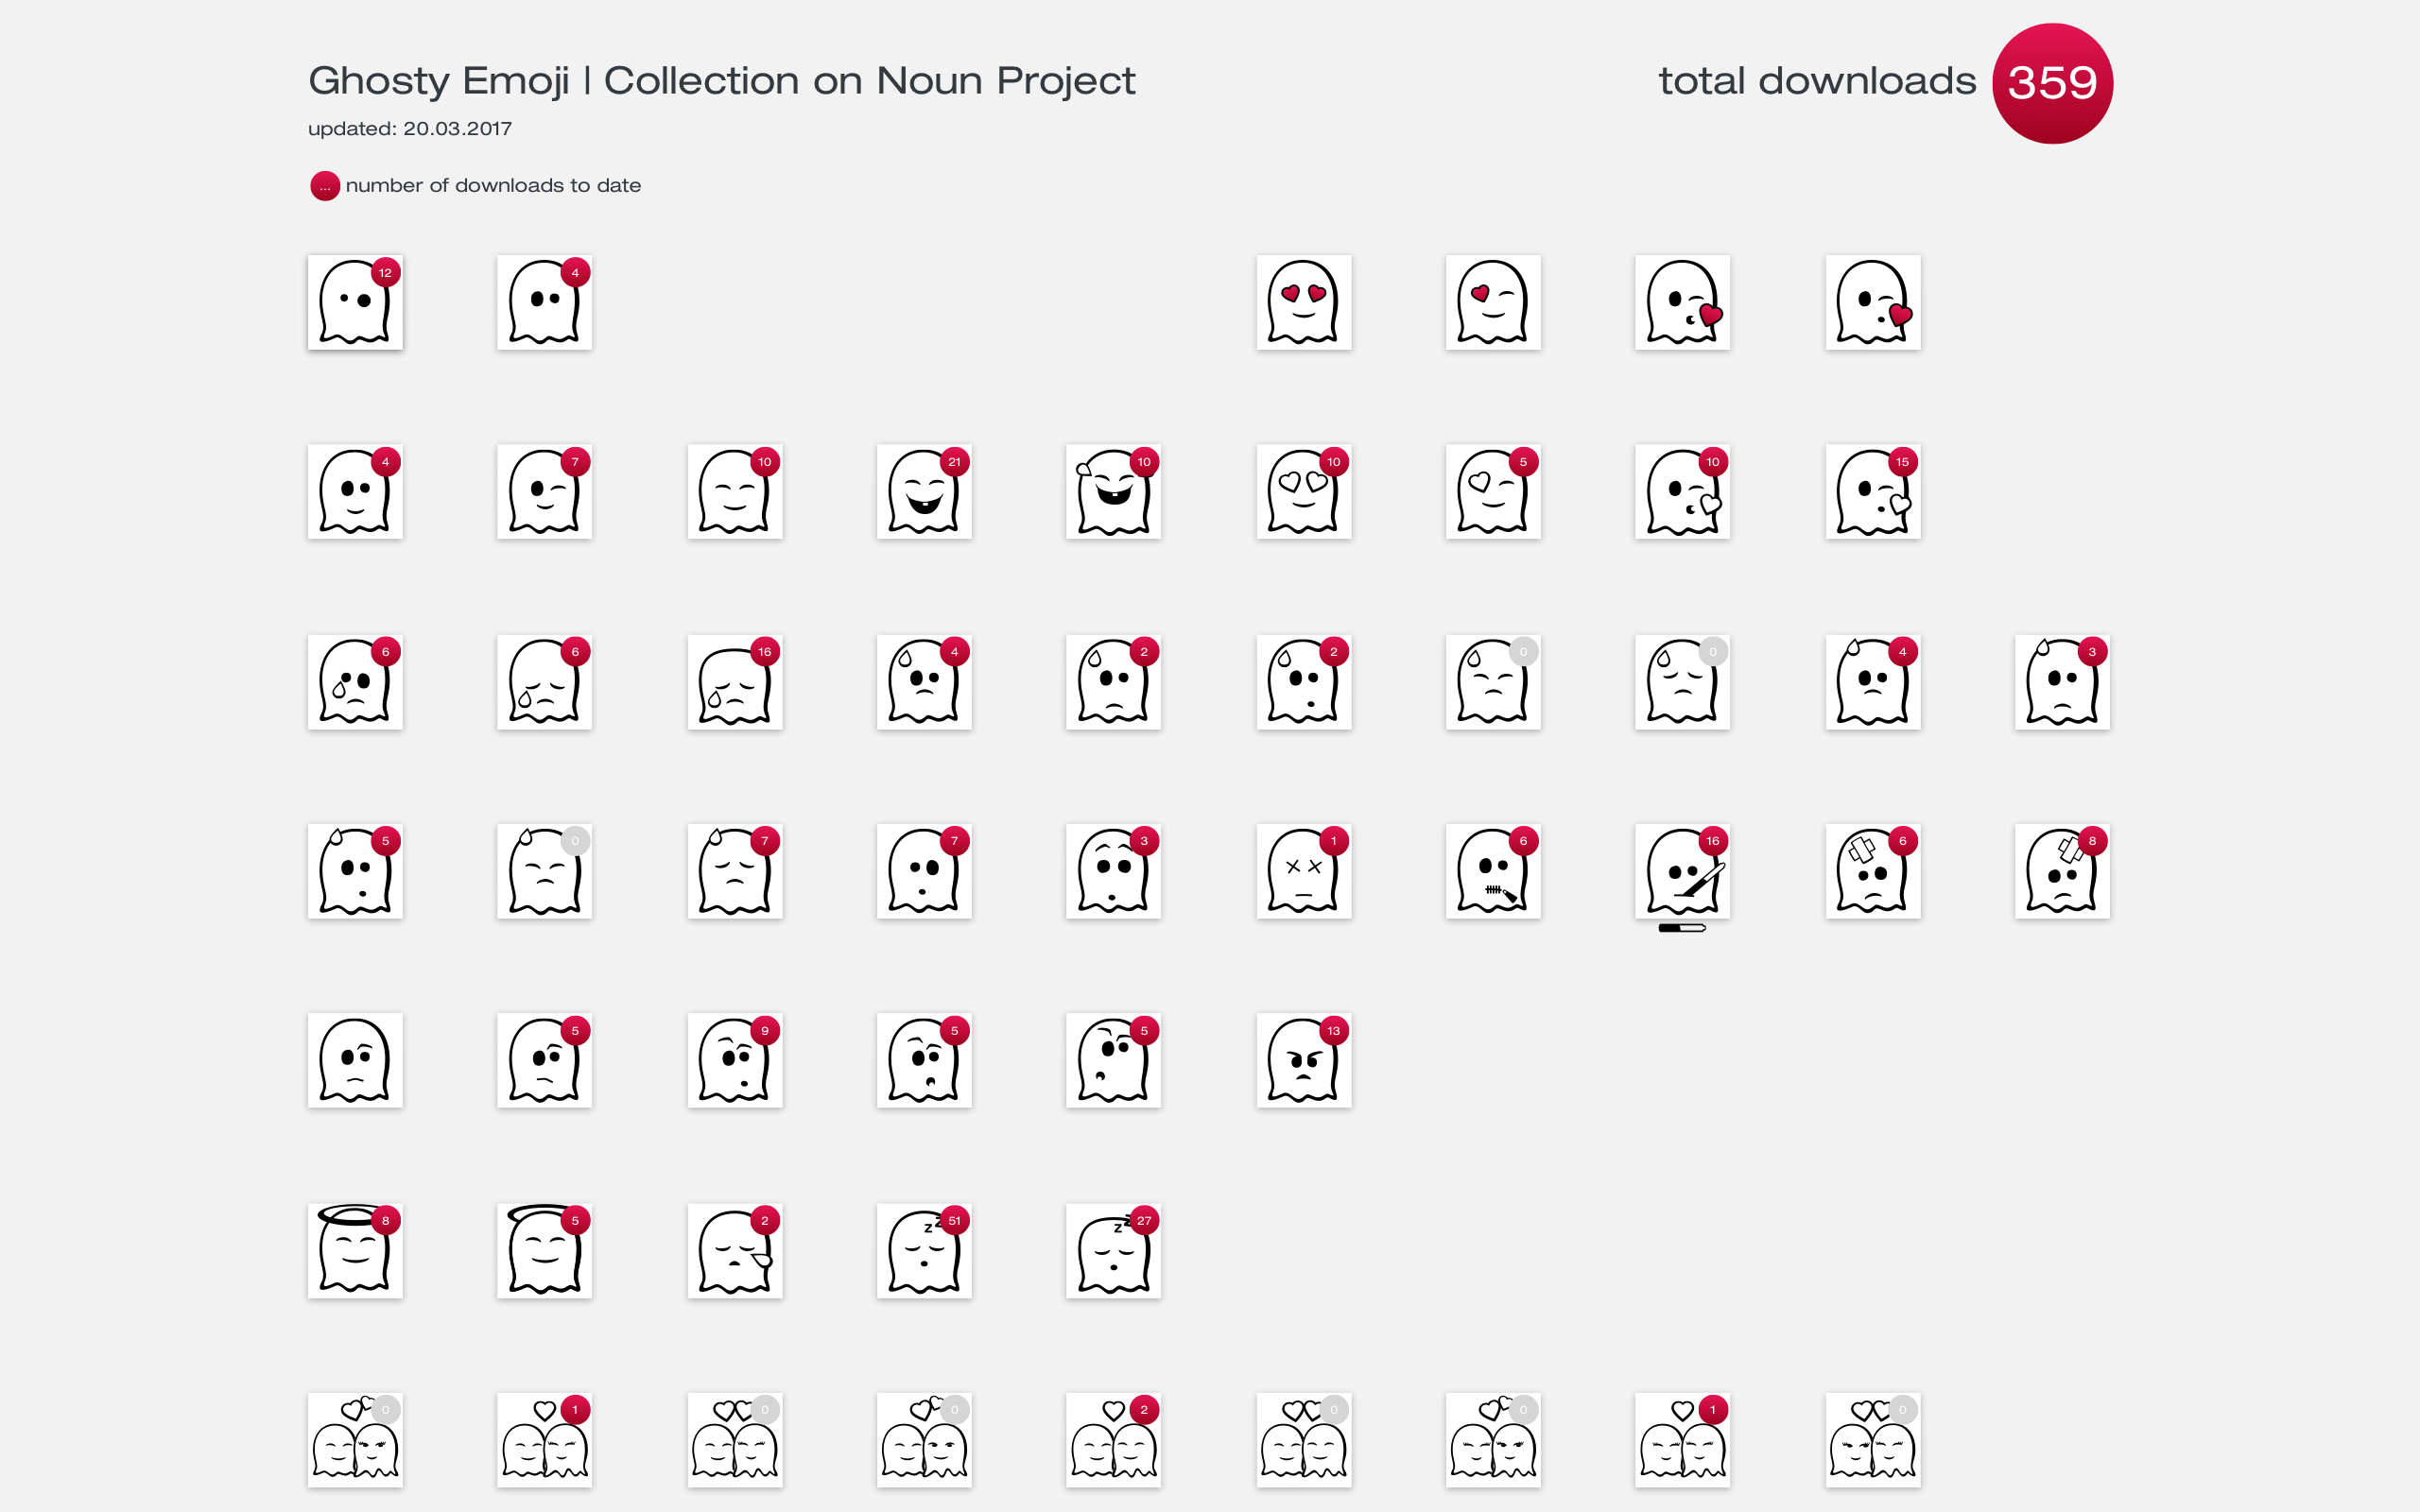 icons in the ghosty emoji series